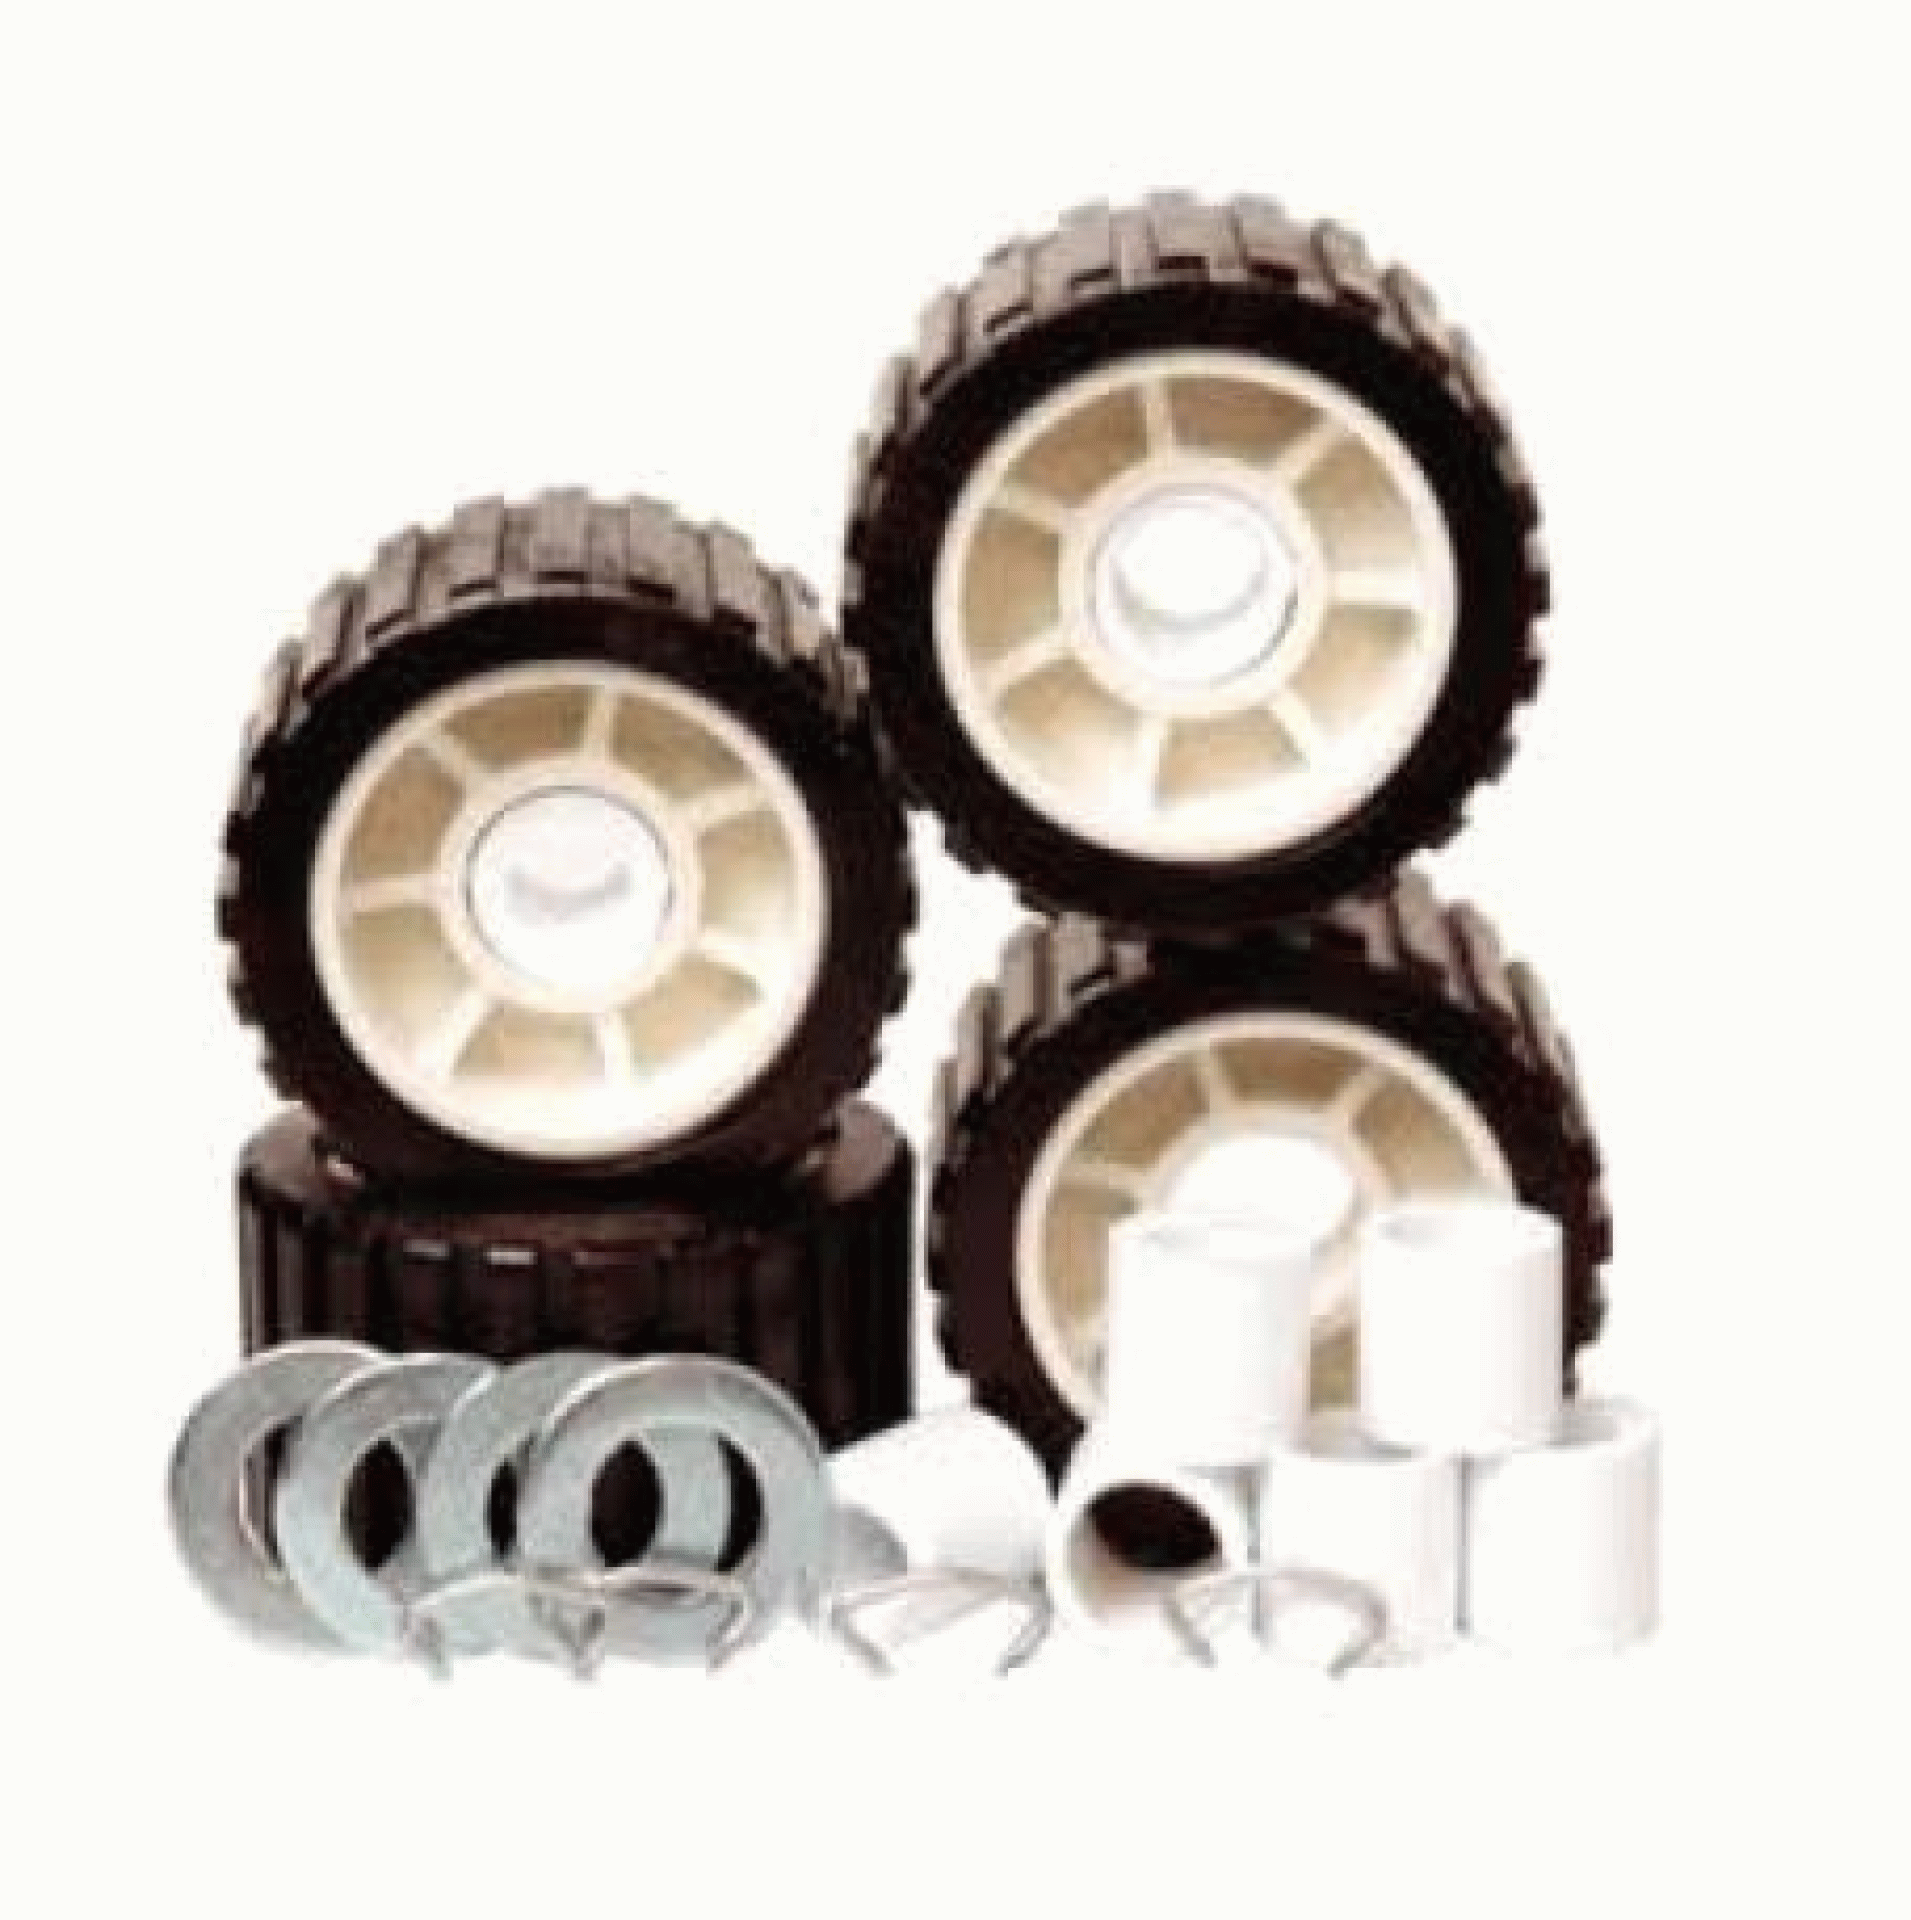 TIE DOWN ENGINEERING INC | 86419 | Wobble Roller Kit Ribbed Hull Savr 5 Inch (4 Rollers And Bushings)